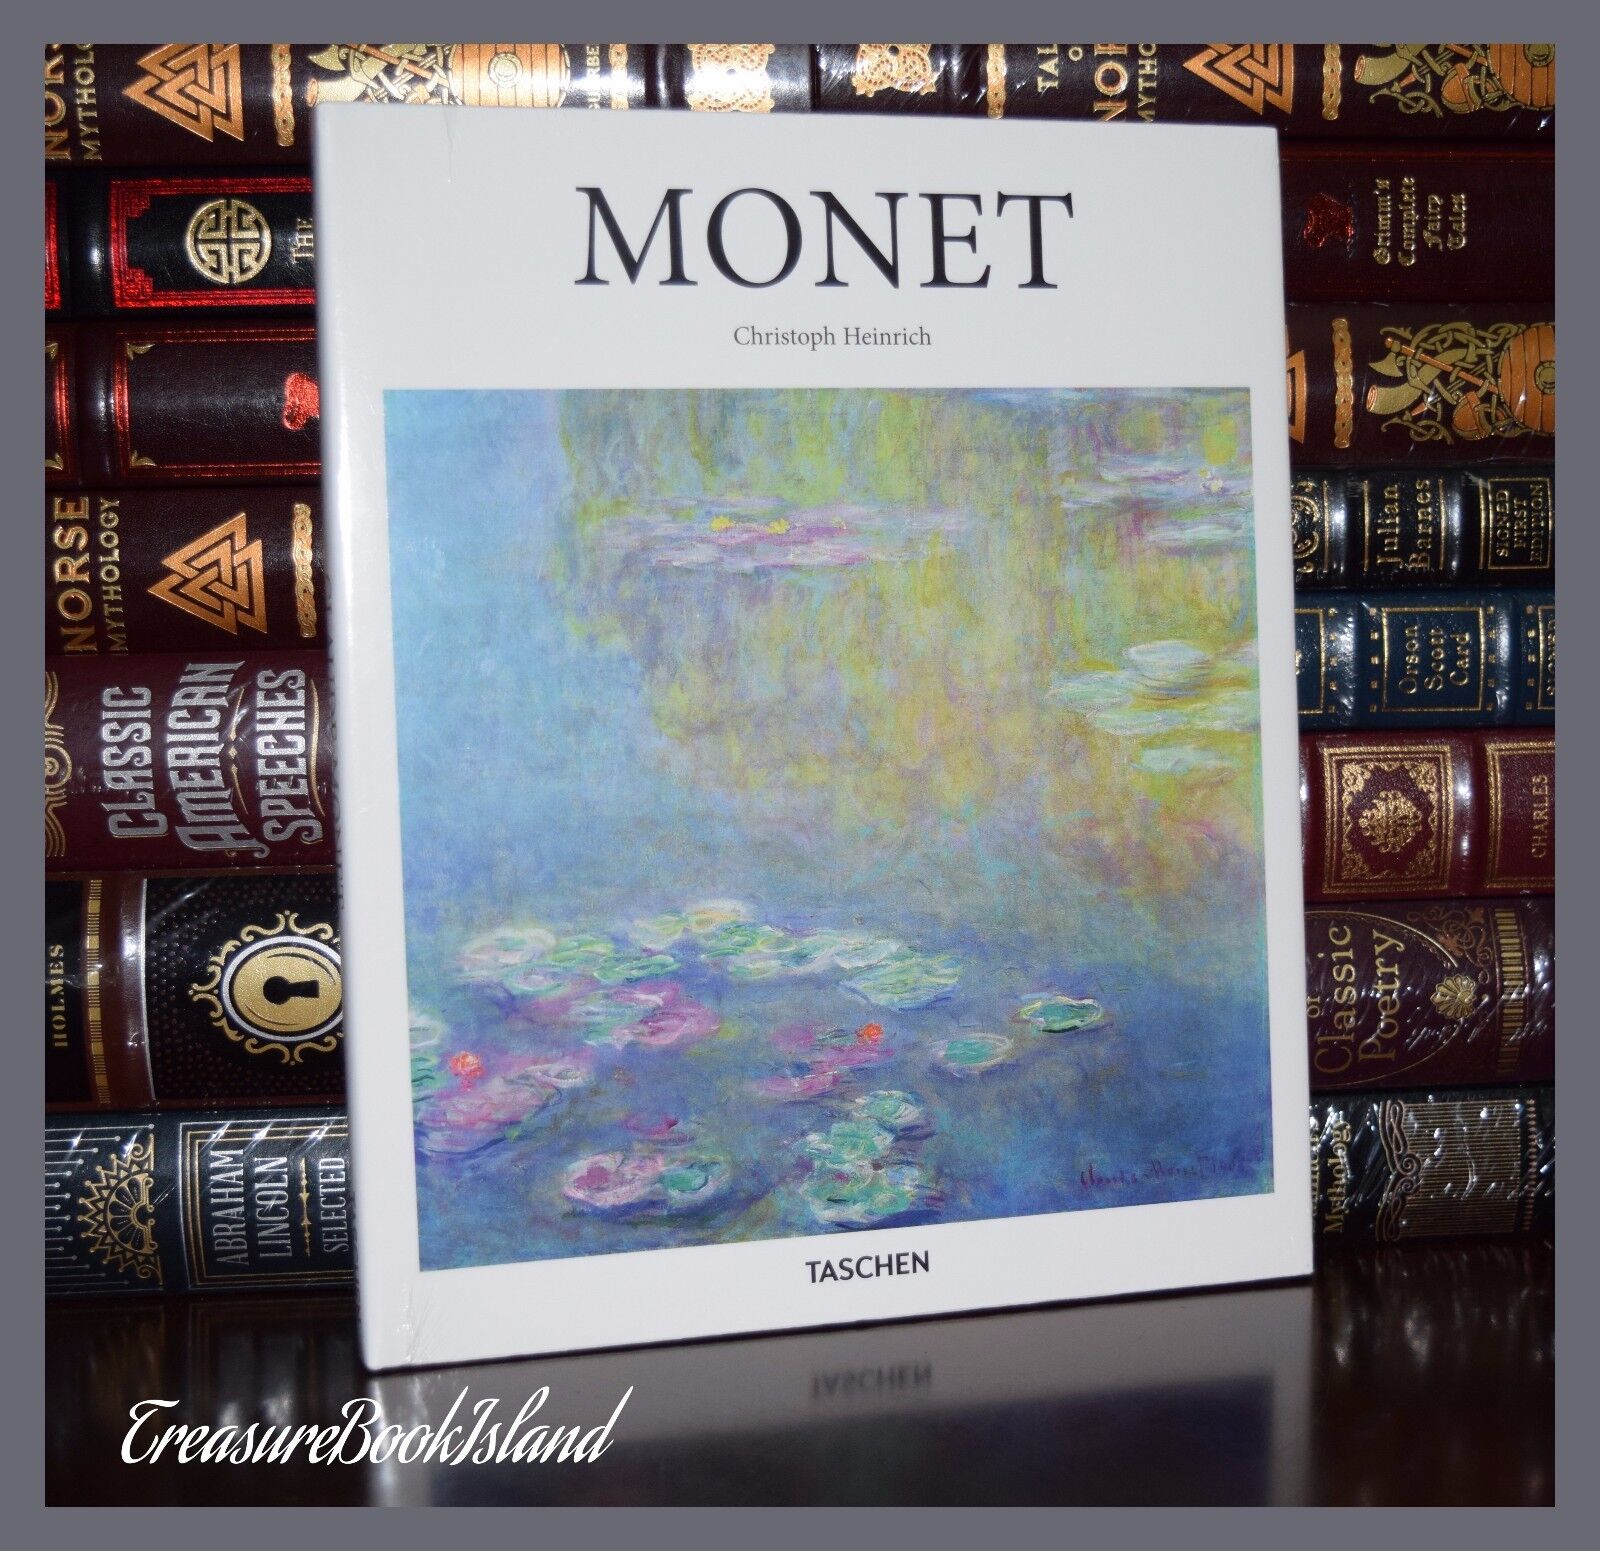 Claude Monet by Heinrich Art Paintings New Sealed Large Deluxe Hardcover Gift Без бренда